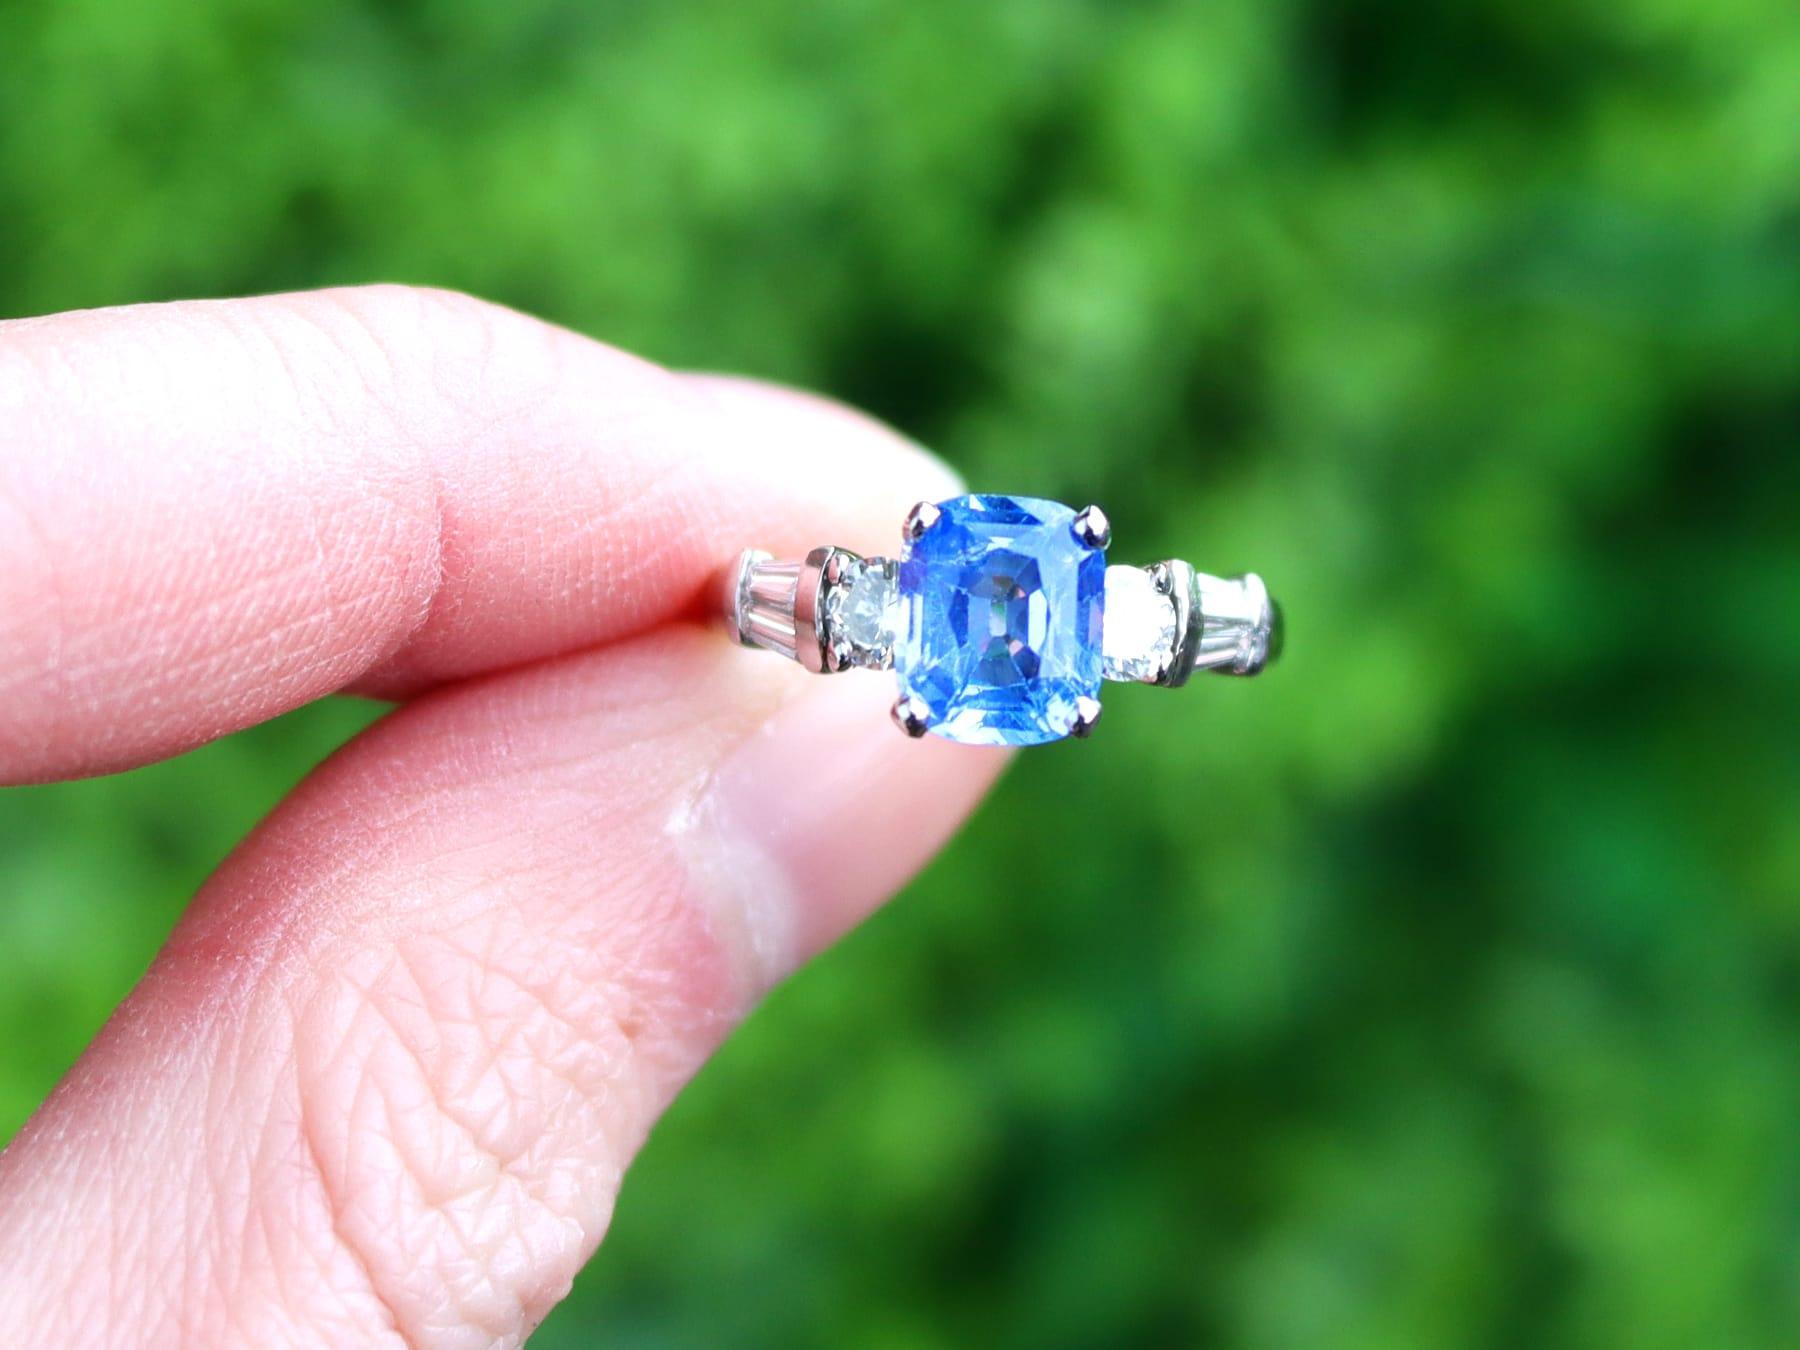 A stunning and impressive vintage 1.52 carat Ceylon sapphire and 0.68 carat diamond, platinum dress ring; part of our diverse antique estate jewelry collections

This stunning, fine and impressive vintage sapphire ring has been crafted in